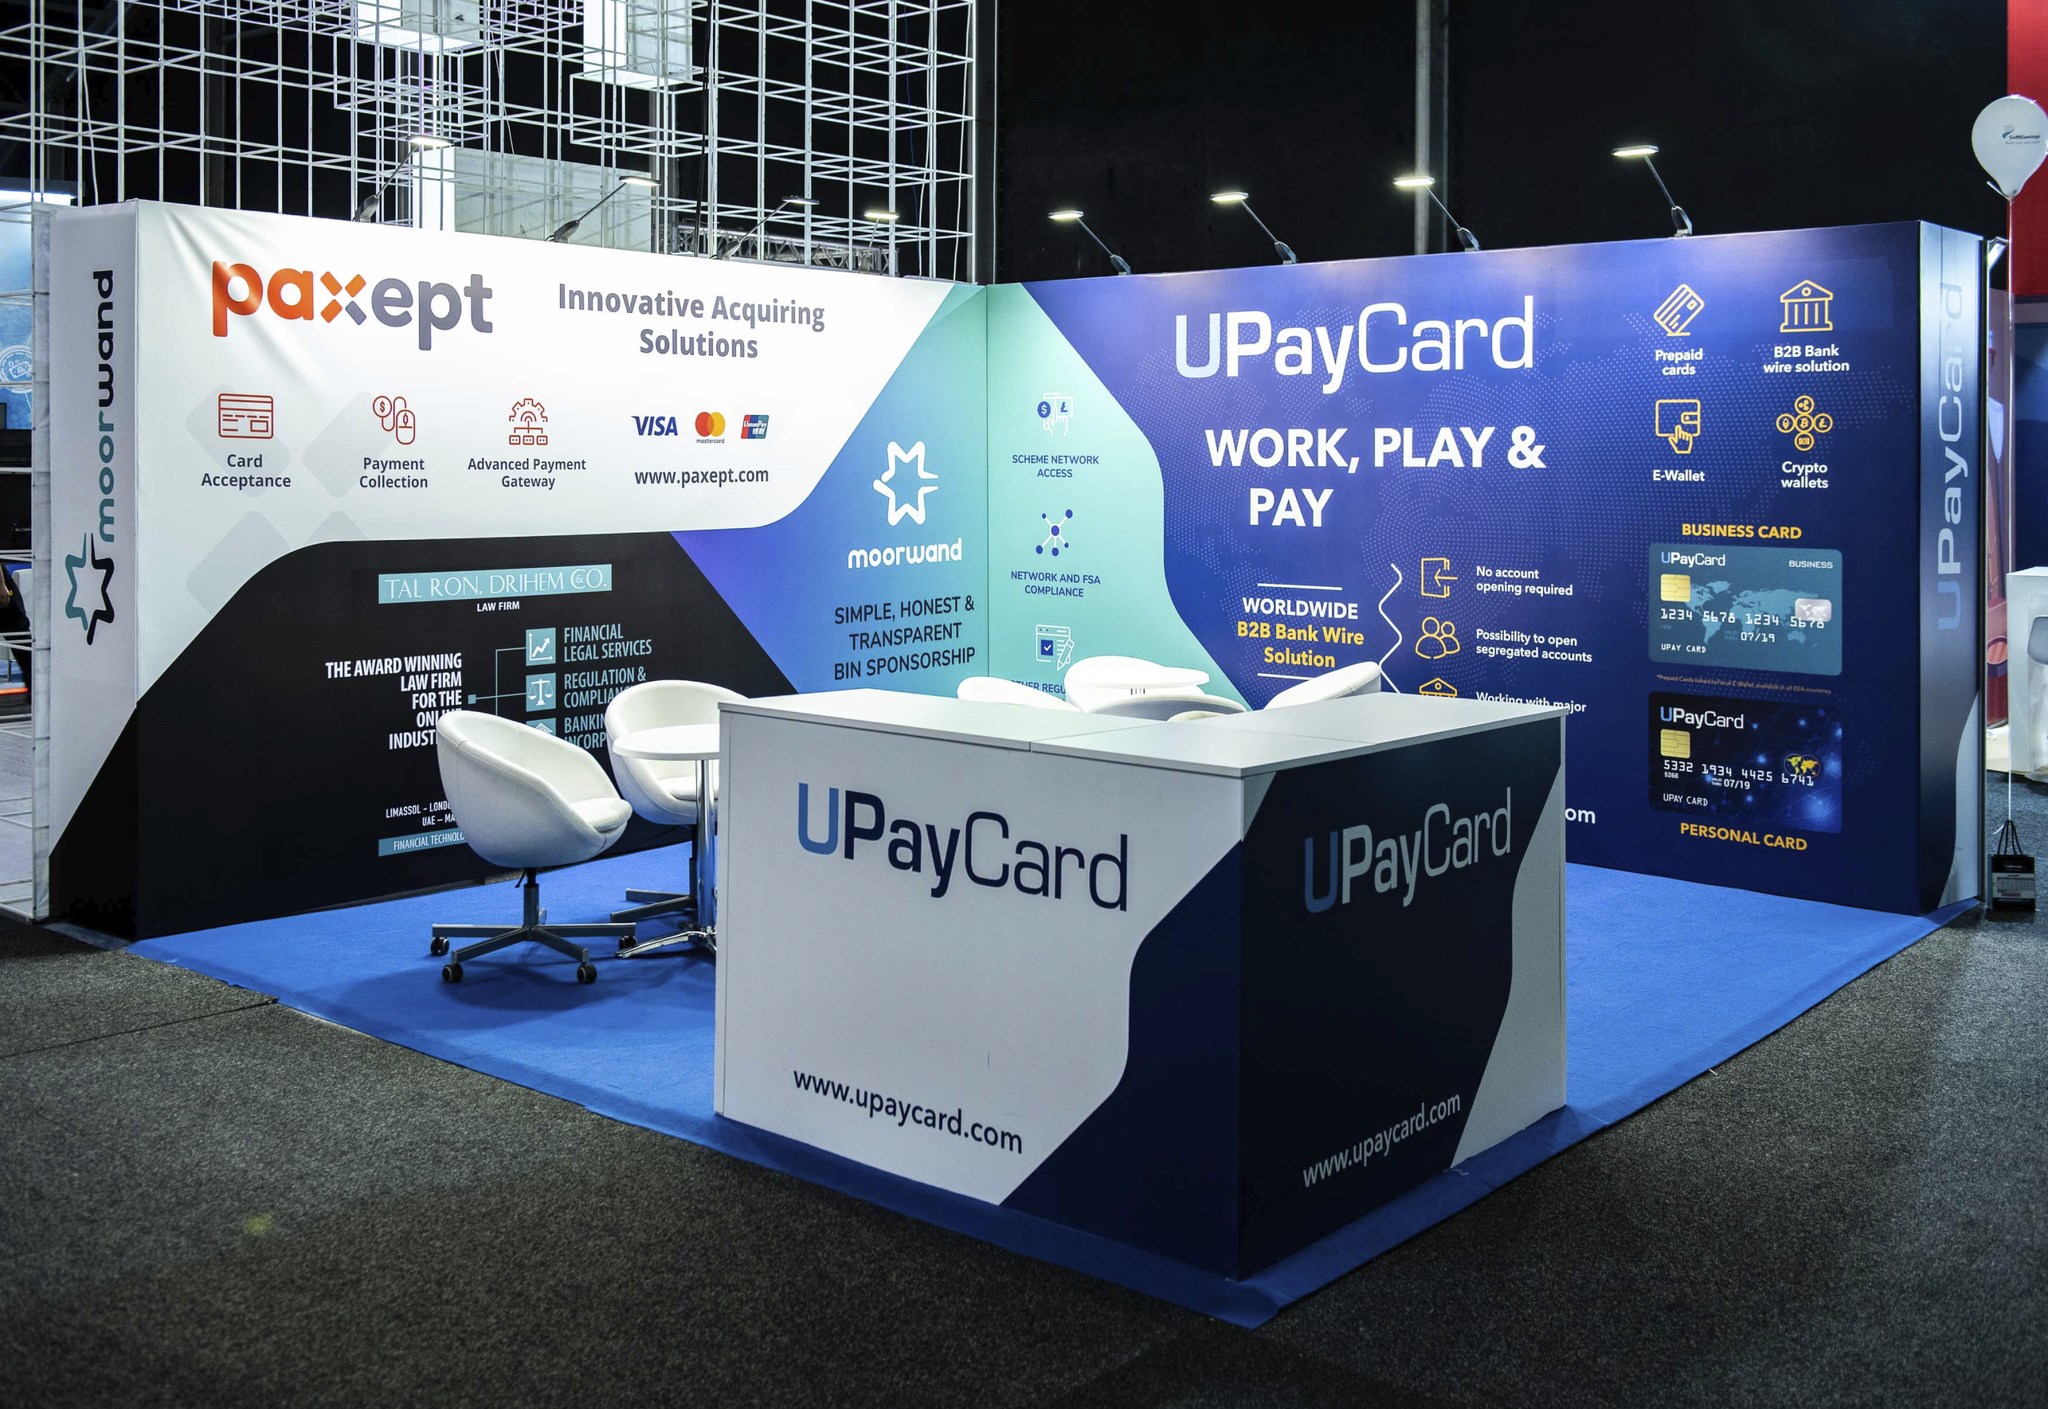 Upaycard Review